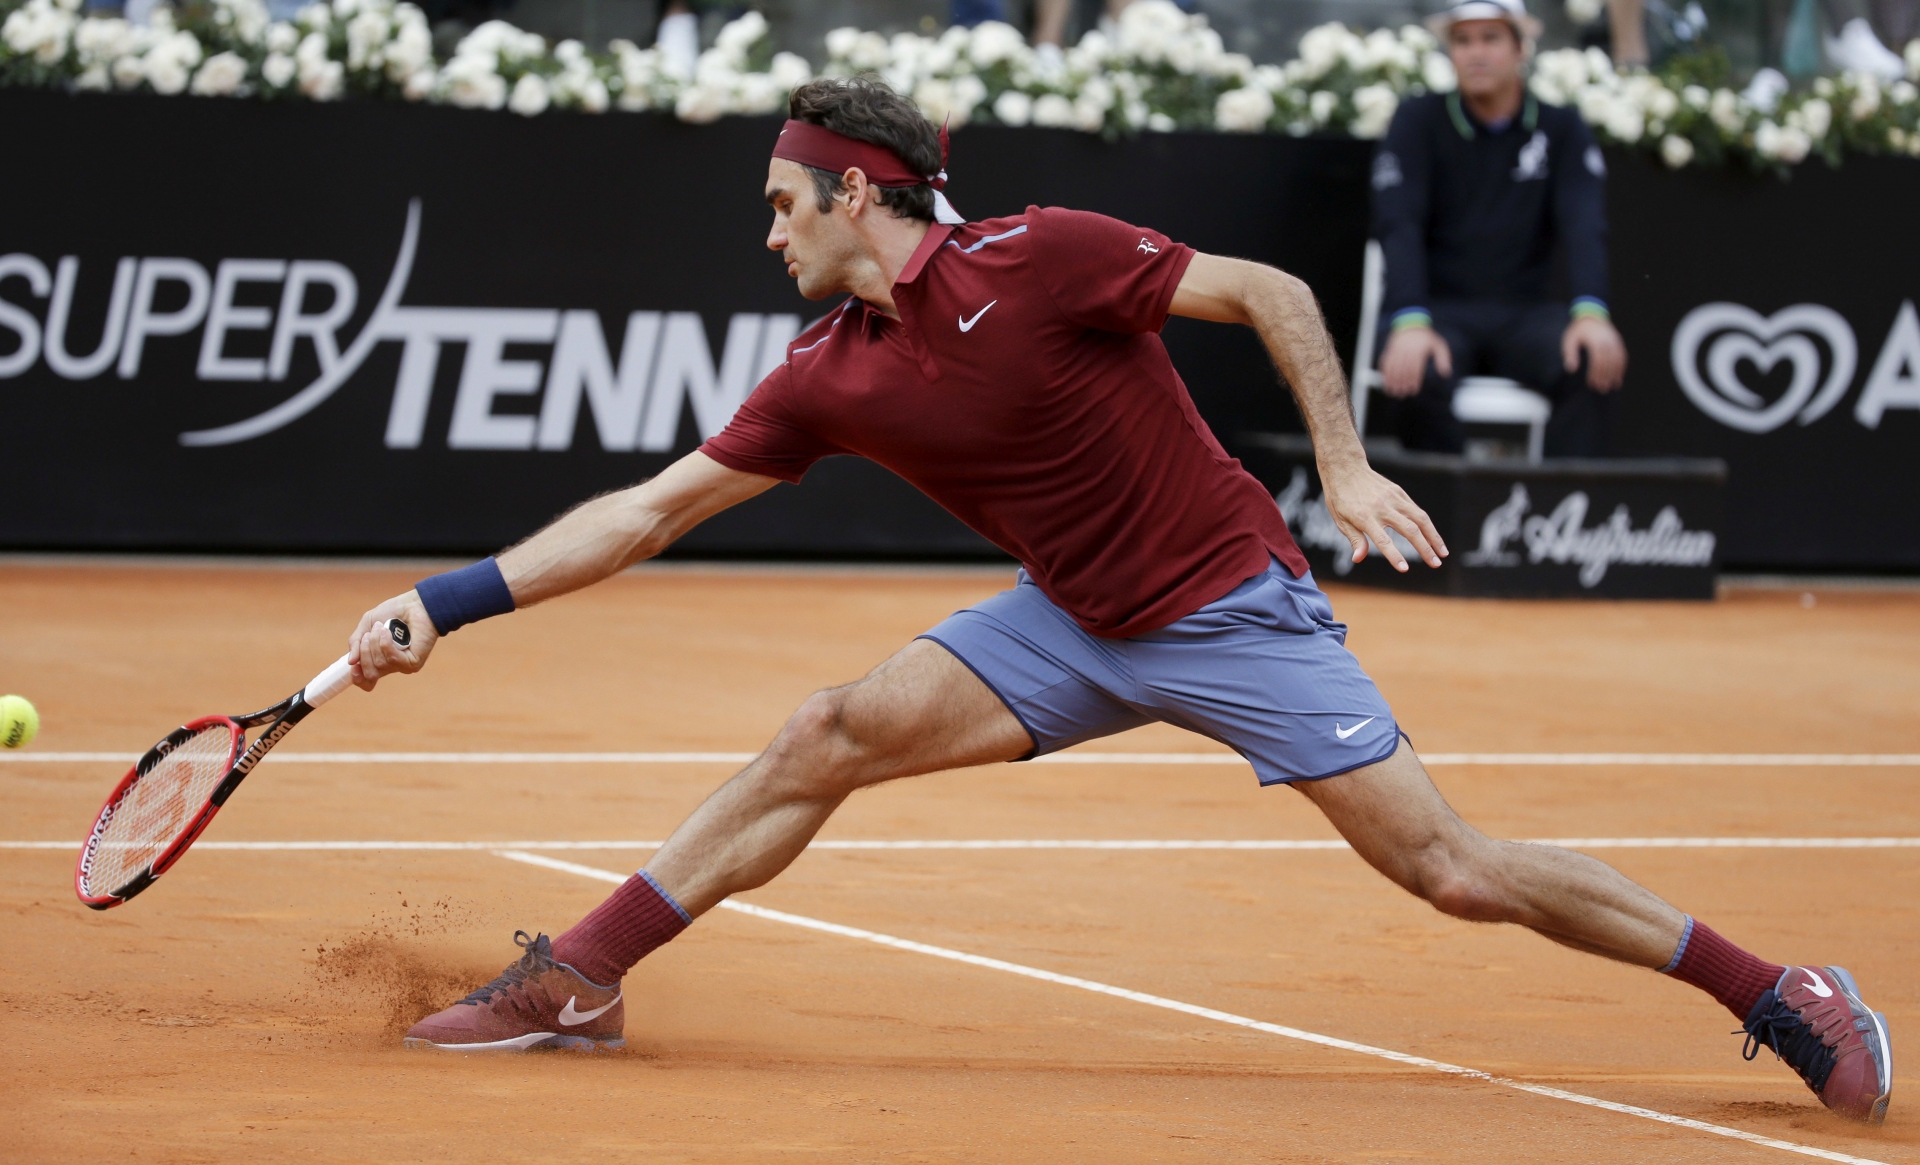 Roger Federer of Switzerland returns the ball to Dominic Thiem of Austria during their match at the Italian Open tennis tournament, in Rome, Thursday, May 12, 2016. (AP Photo/Andrew Medichini)